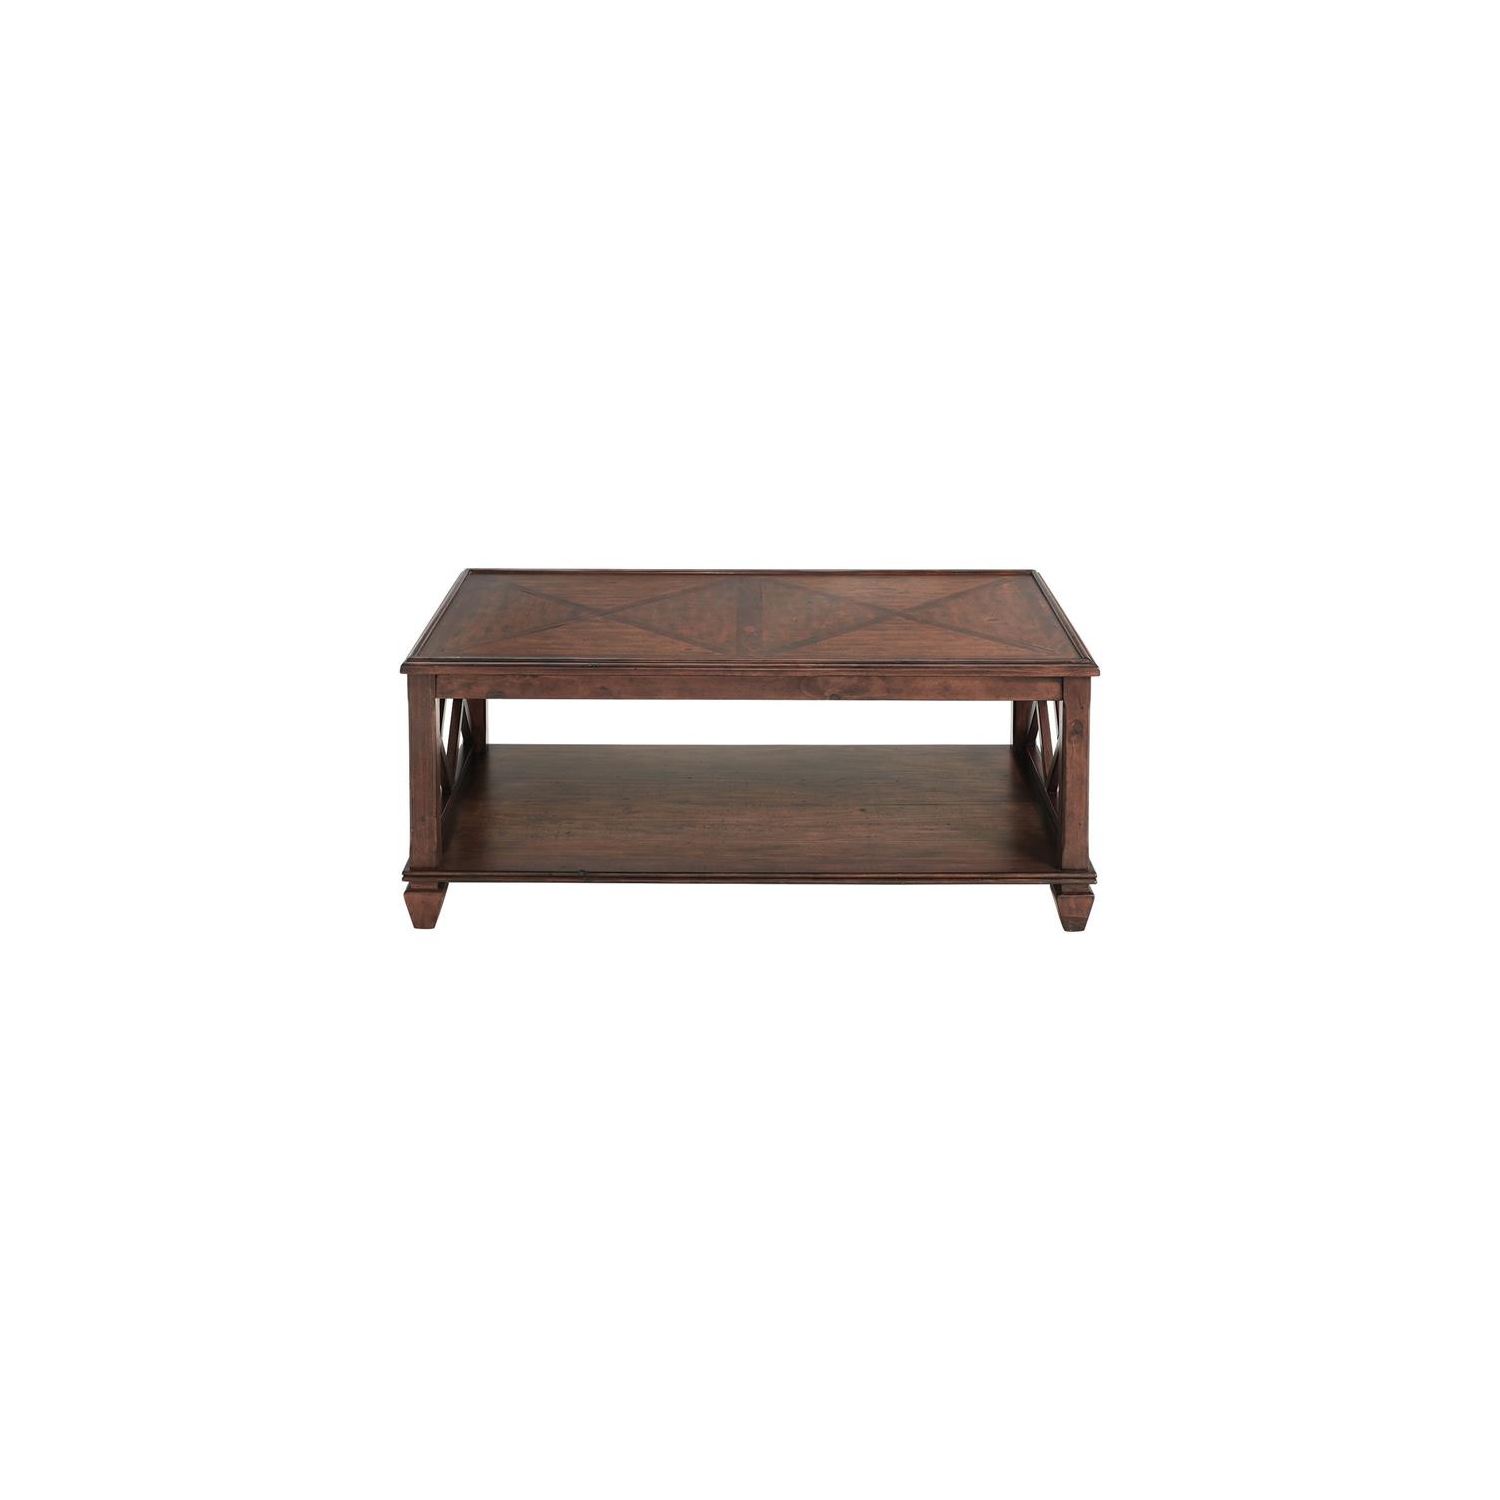 Alaterre Furniture Stockbridge 45"L Solid Wood Coffee Table with a Cherry Finish